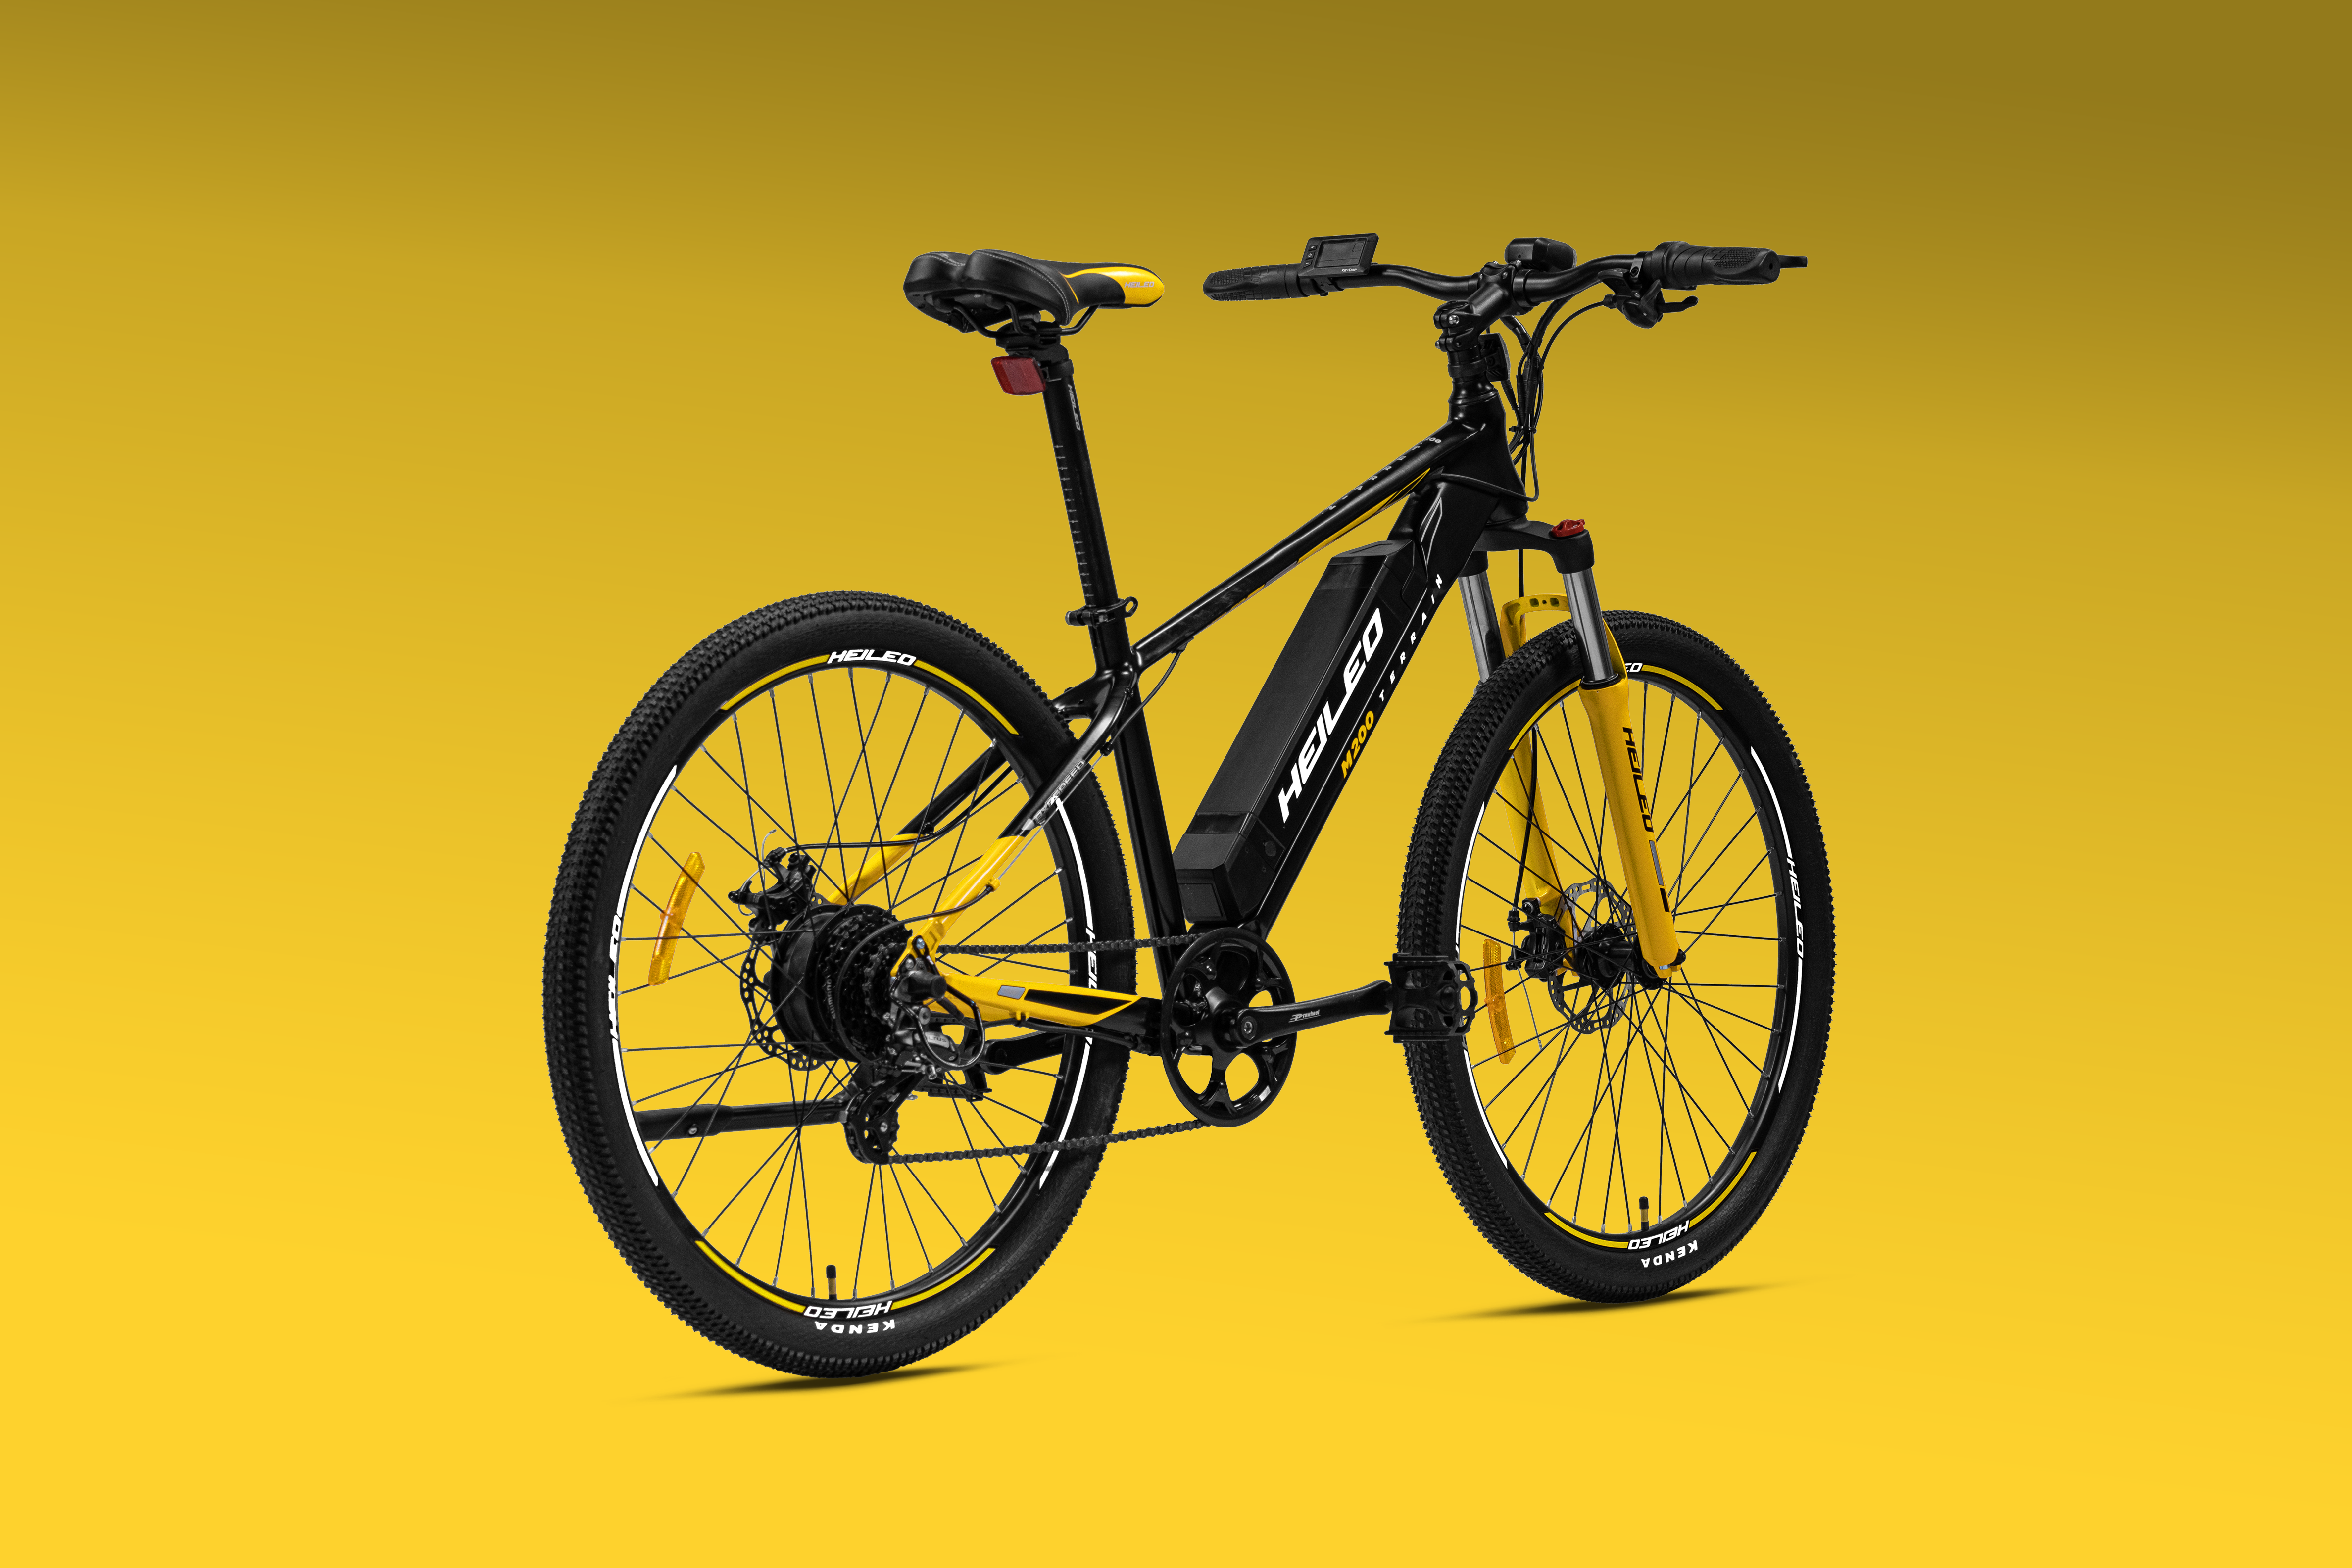 Heileo M200 - Best-rated & Stylish Mountain Electric Bicycles at